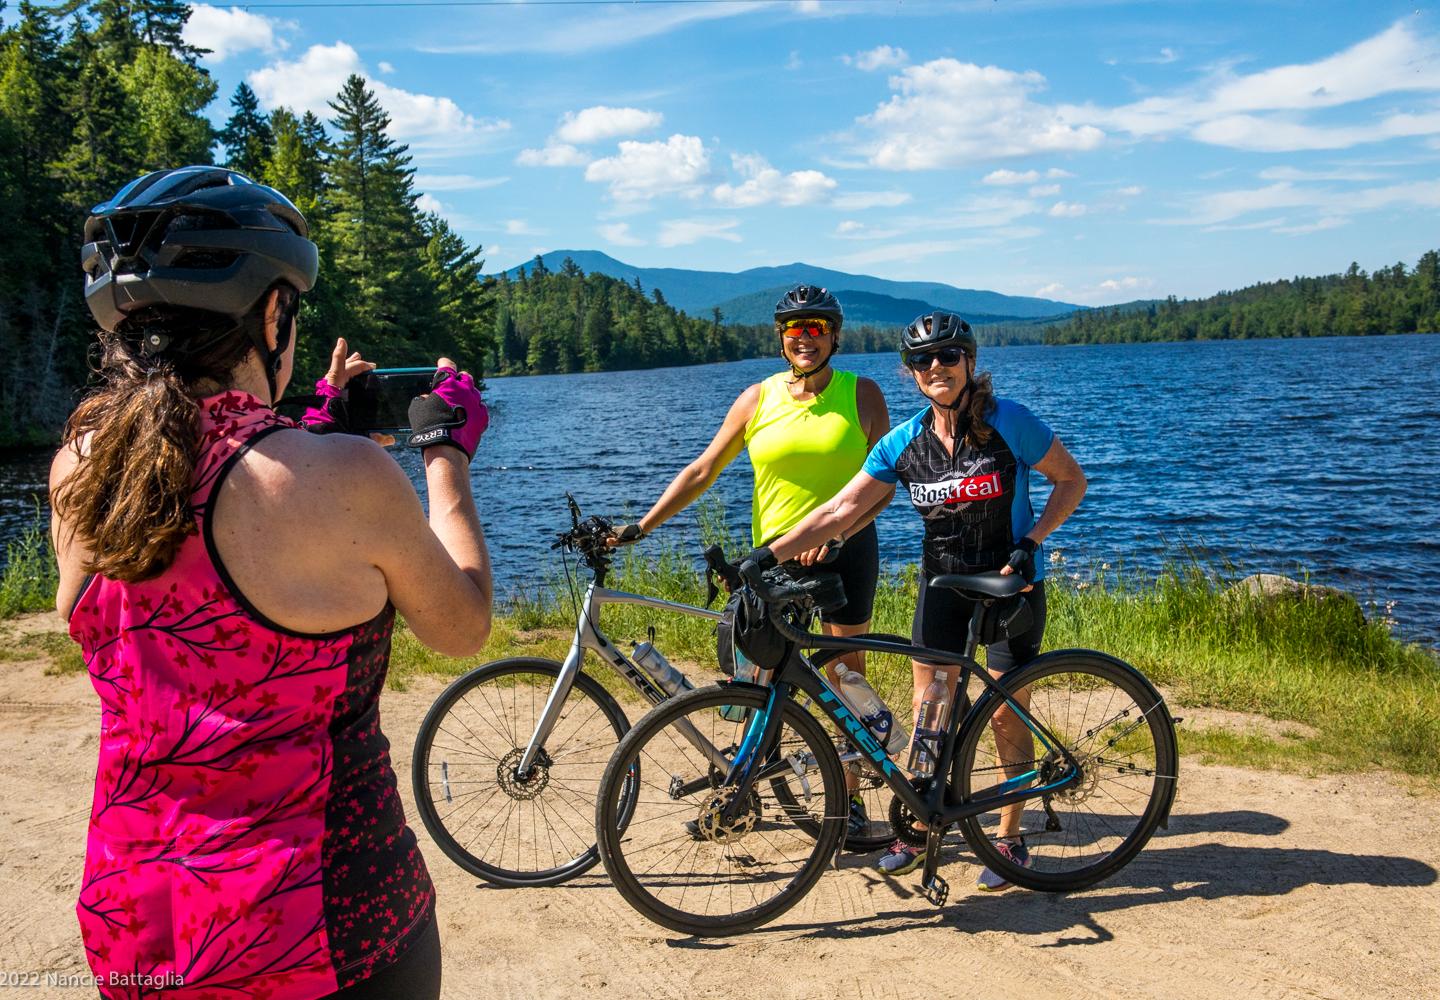 Registration for the entire slate of 2023 Bike Adirondacks events is now open.